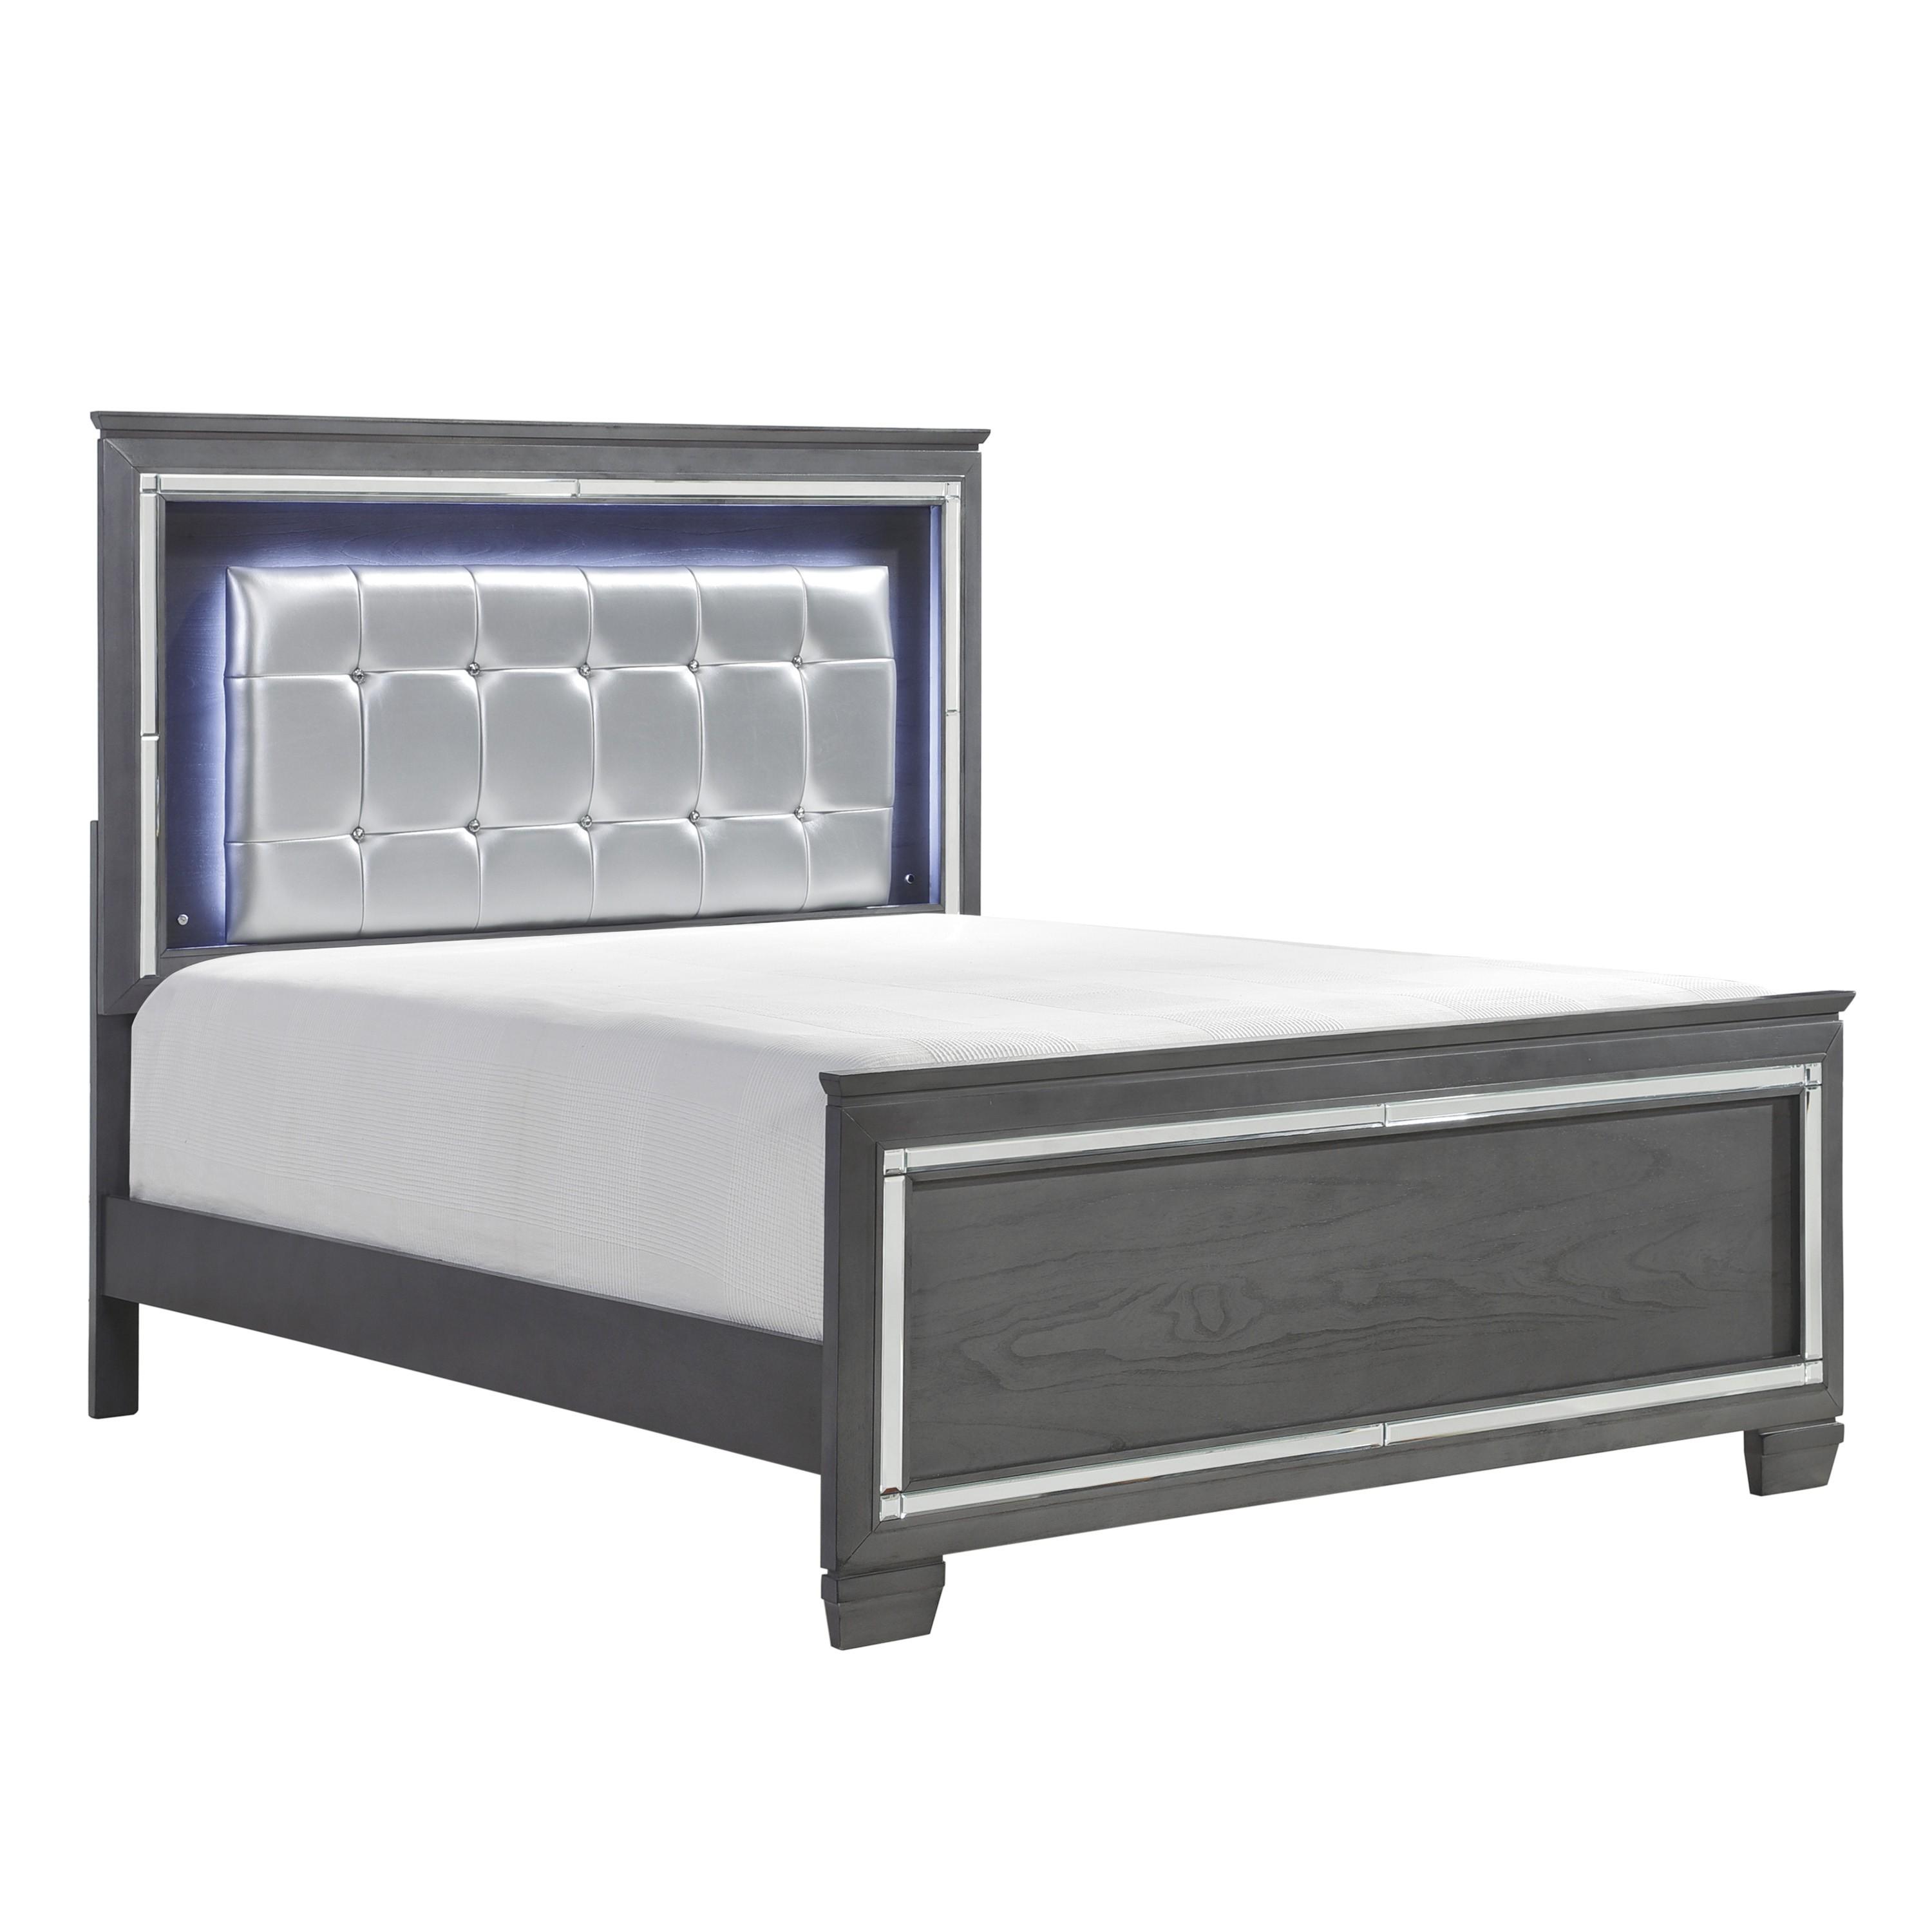 Modern Bed 1916KGY-1CK* Allura 1916KGY-1CK* in Gray Faux Leather